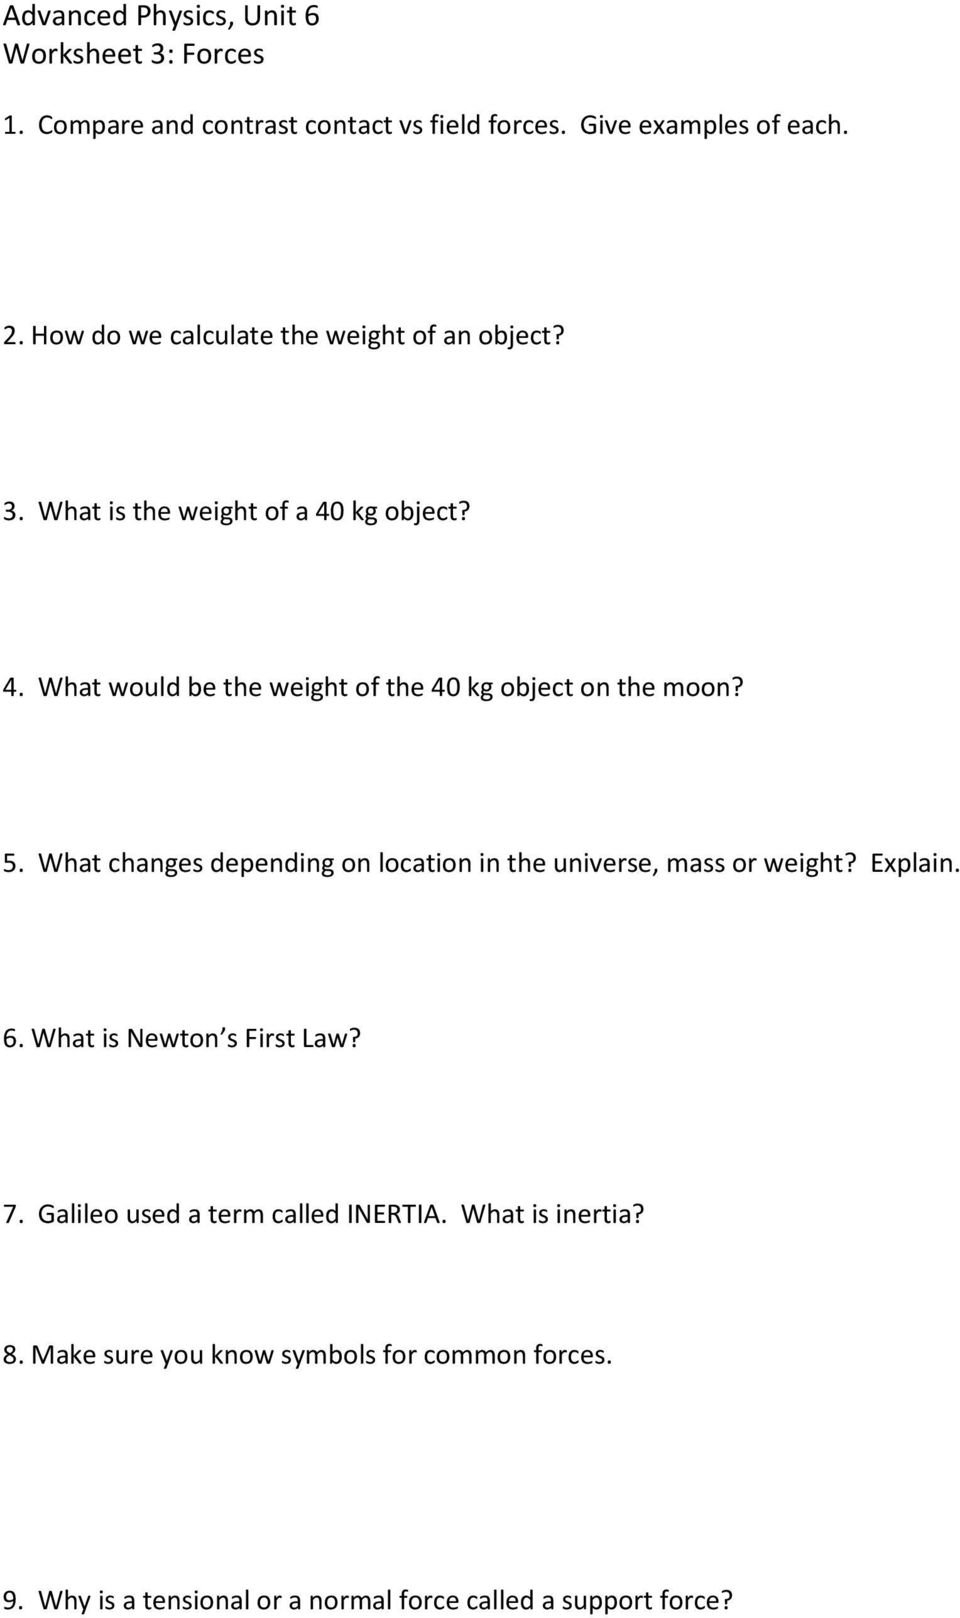 Worksheet 1 Free Body Or Force Diagrams  Pdf And Advanced Physics Unit 6 Worksheet 3 Forces